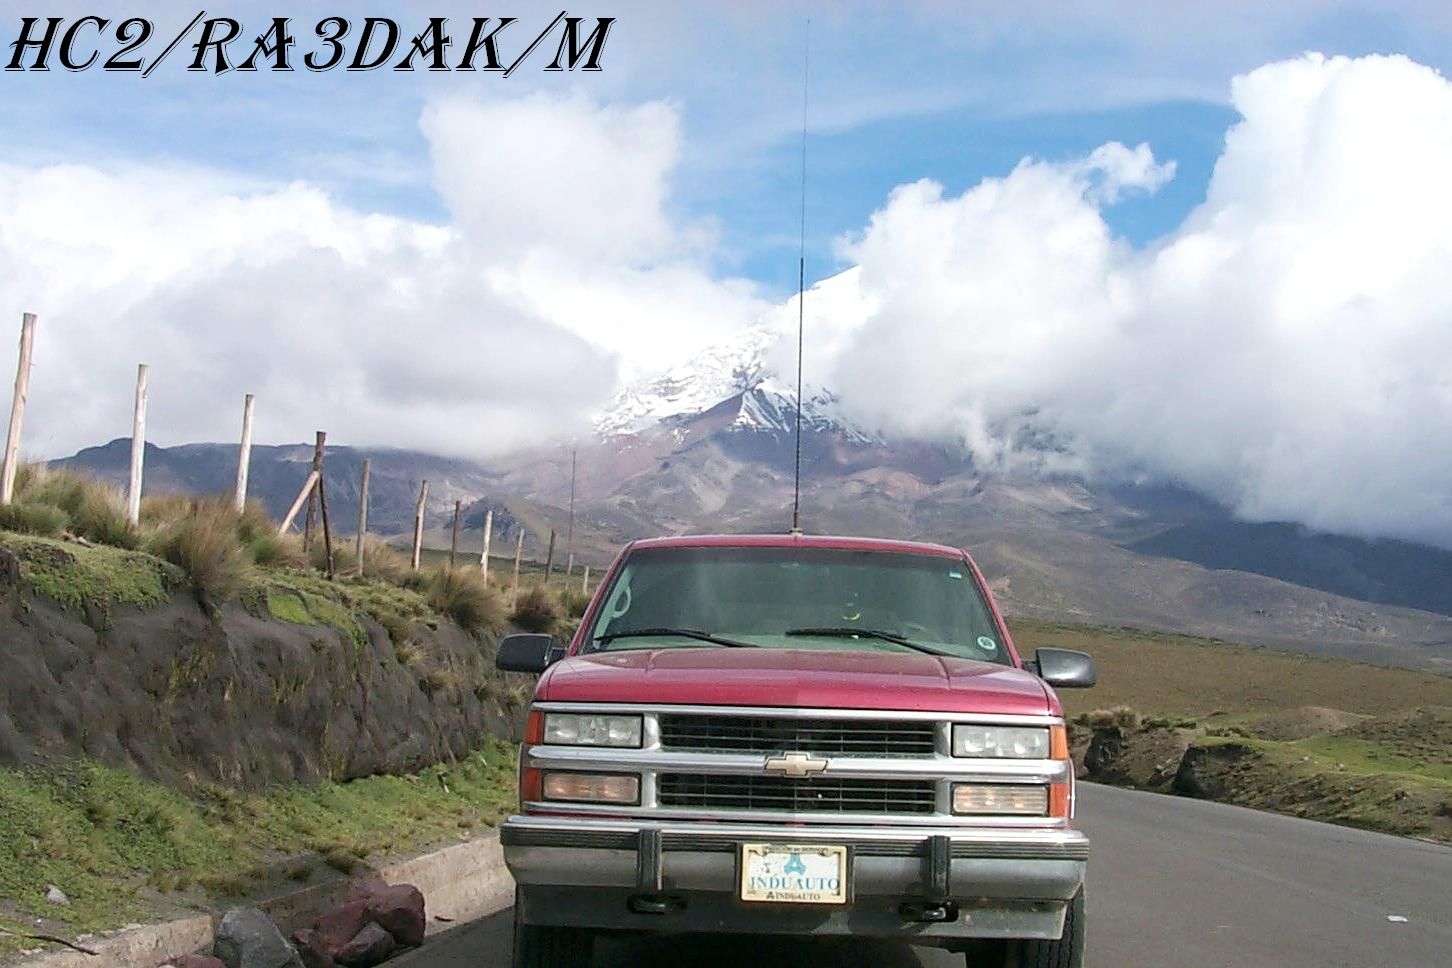 HC2/RA3DAK/M Transceiver IC-706MKII, Mobile Antenna MFJ-1620T, HF Stick, 20M. Chimborazo is a currently inactive stratovolcano in the Cordillera Occidental range of the Andes.